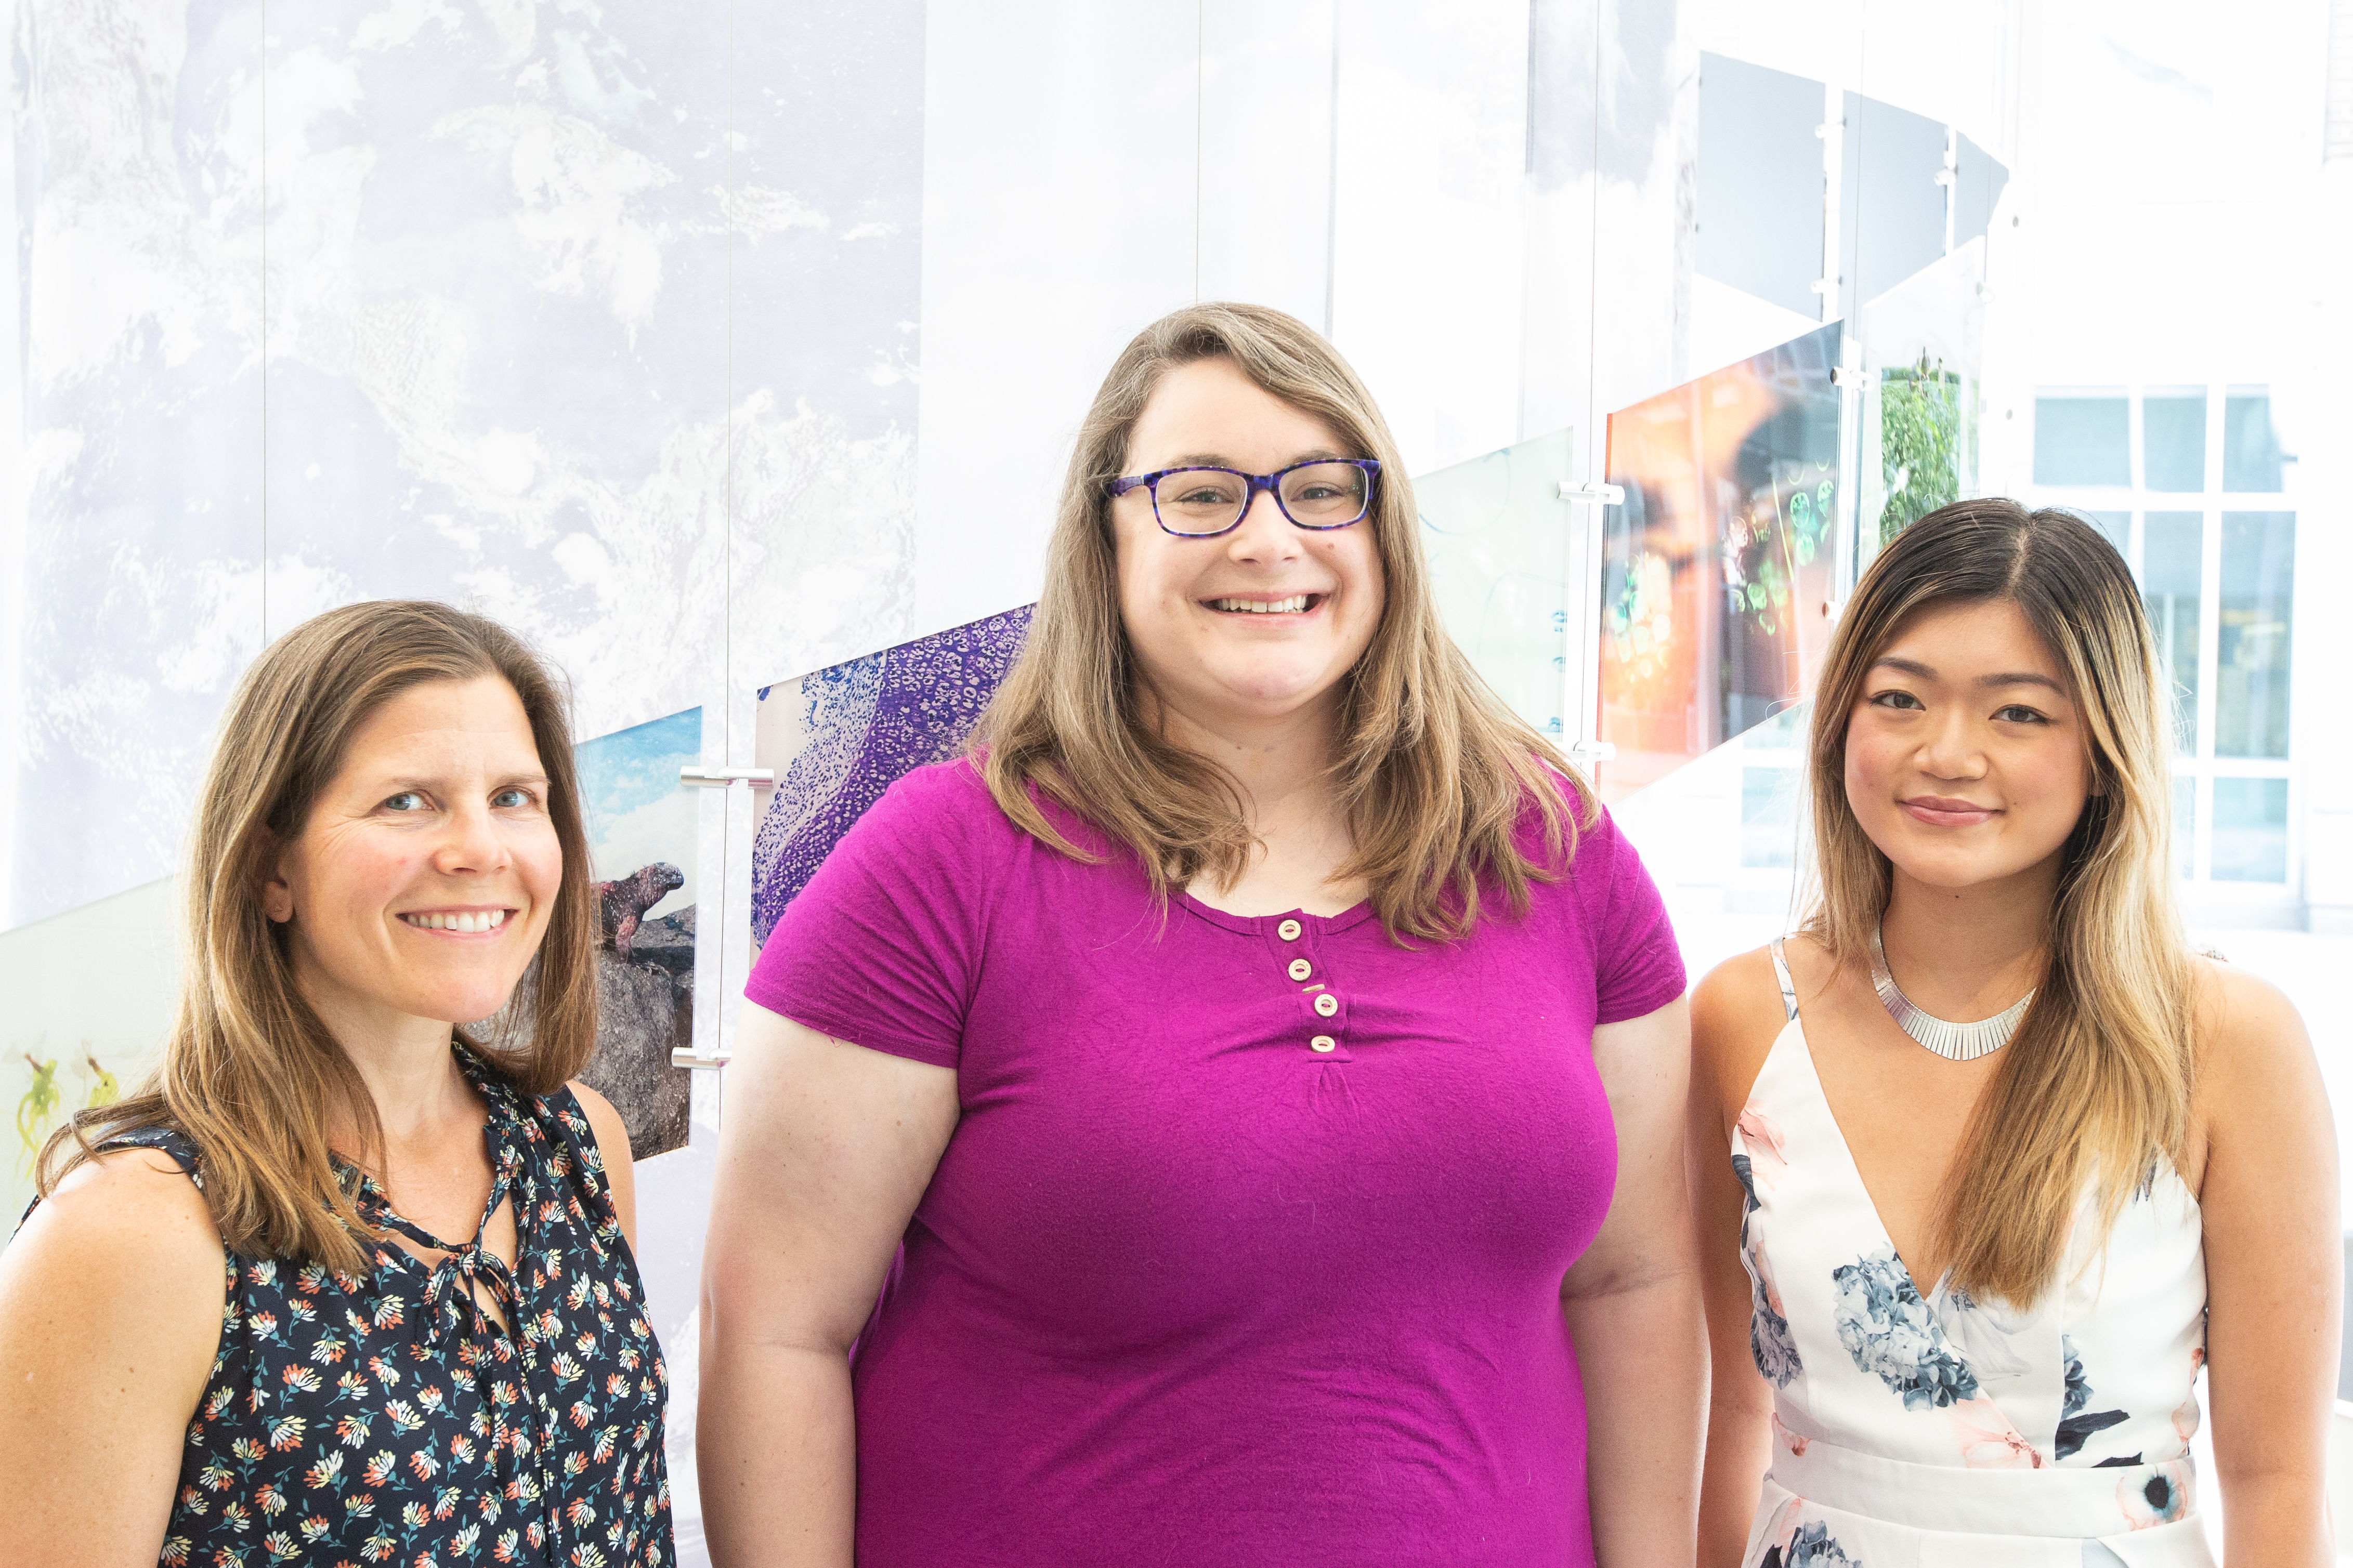 From left to right: RIPE Deputy Director Lisa Ainsworth, Communications Manager Allie Arp, Communications Specialist Amanda Nguyen. Credit: Julia Pollack/IGB Communications